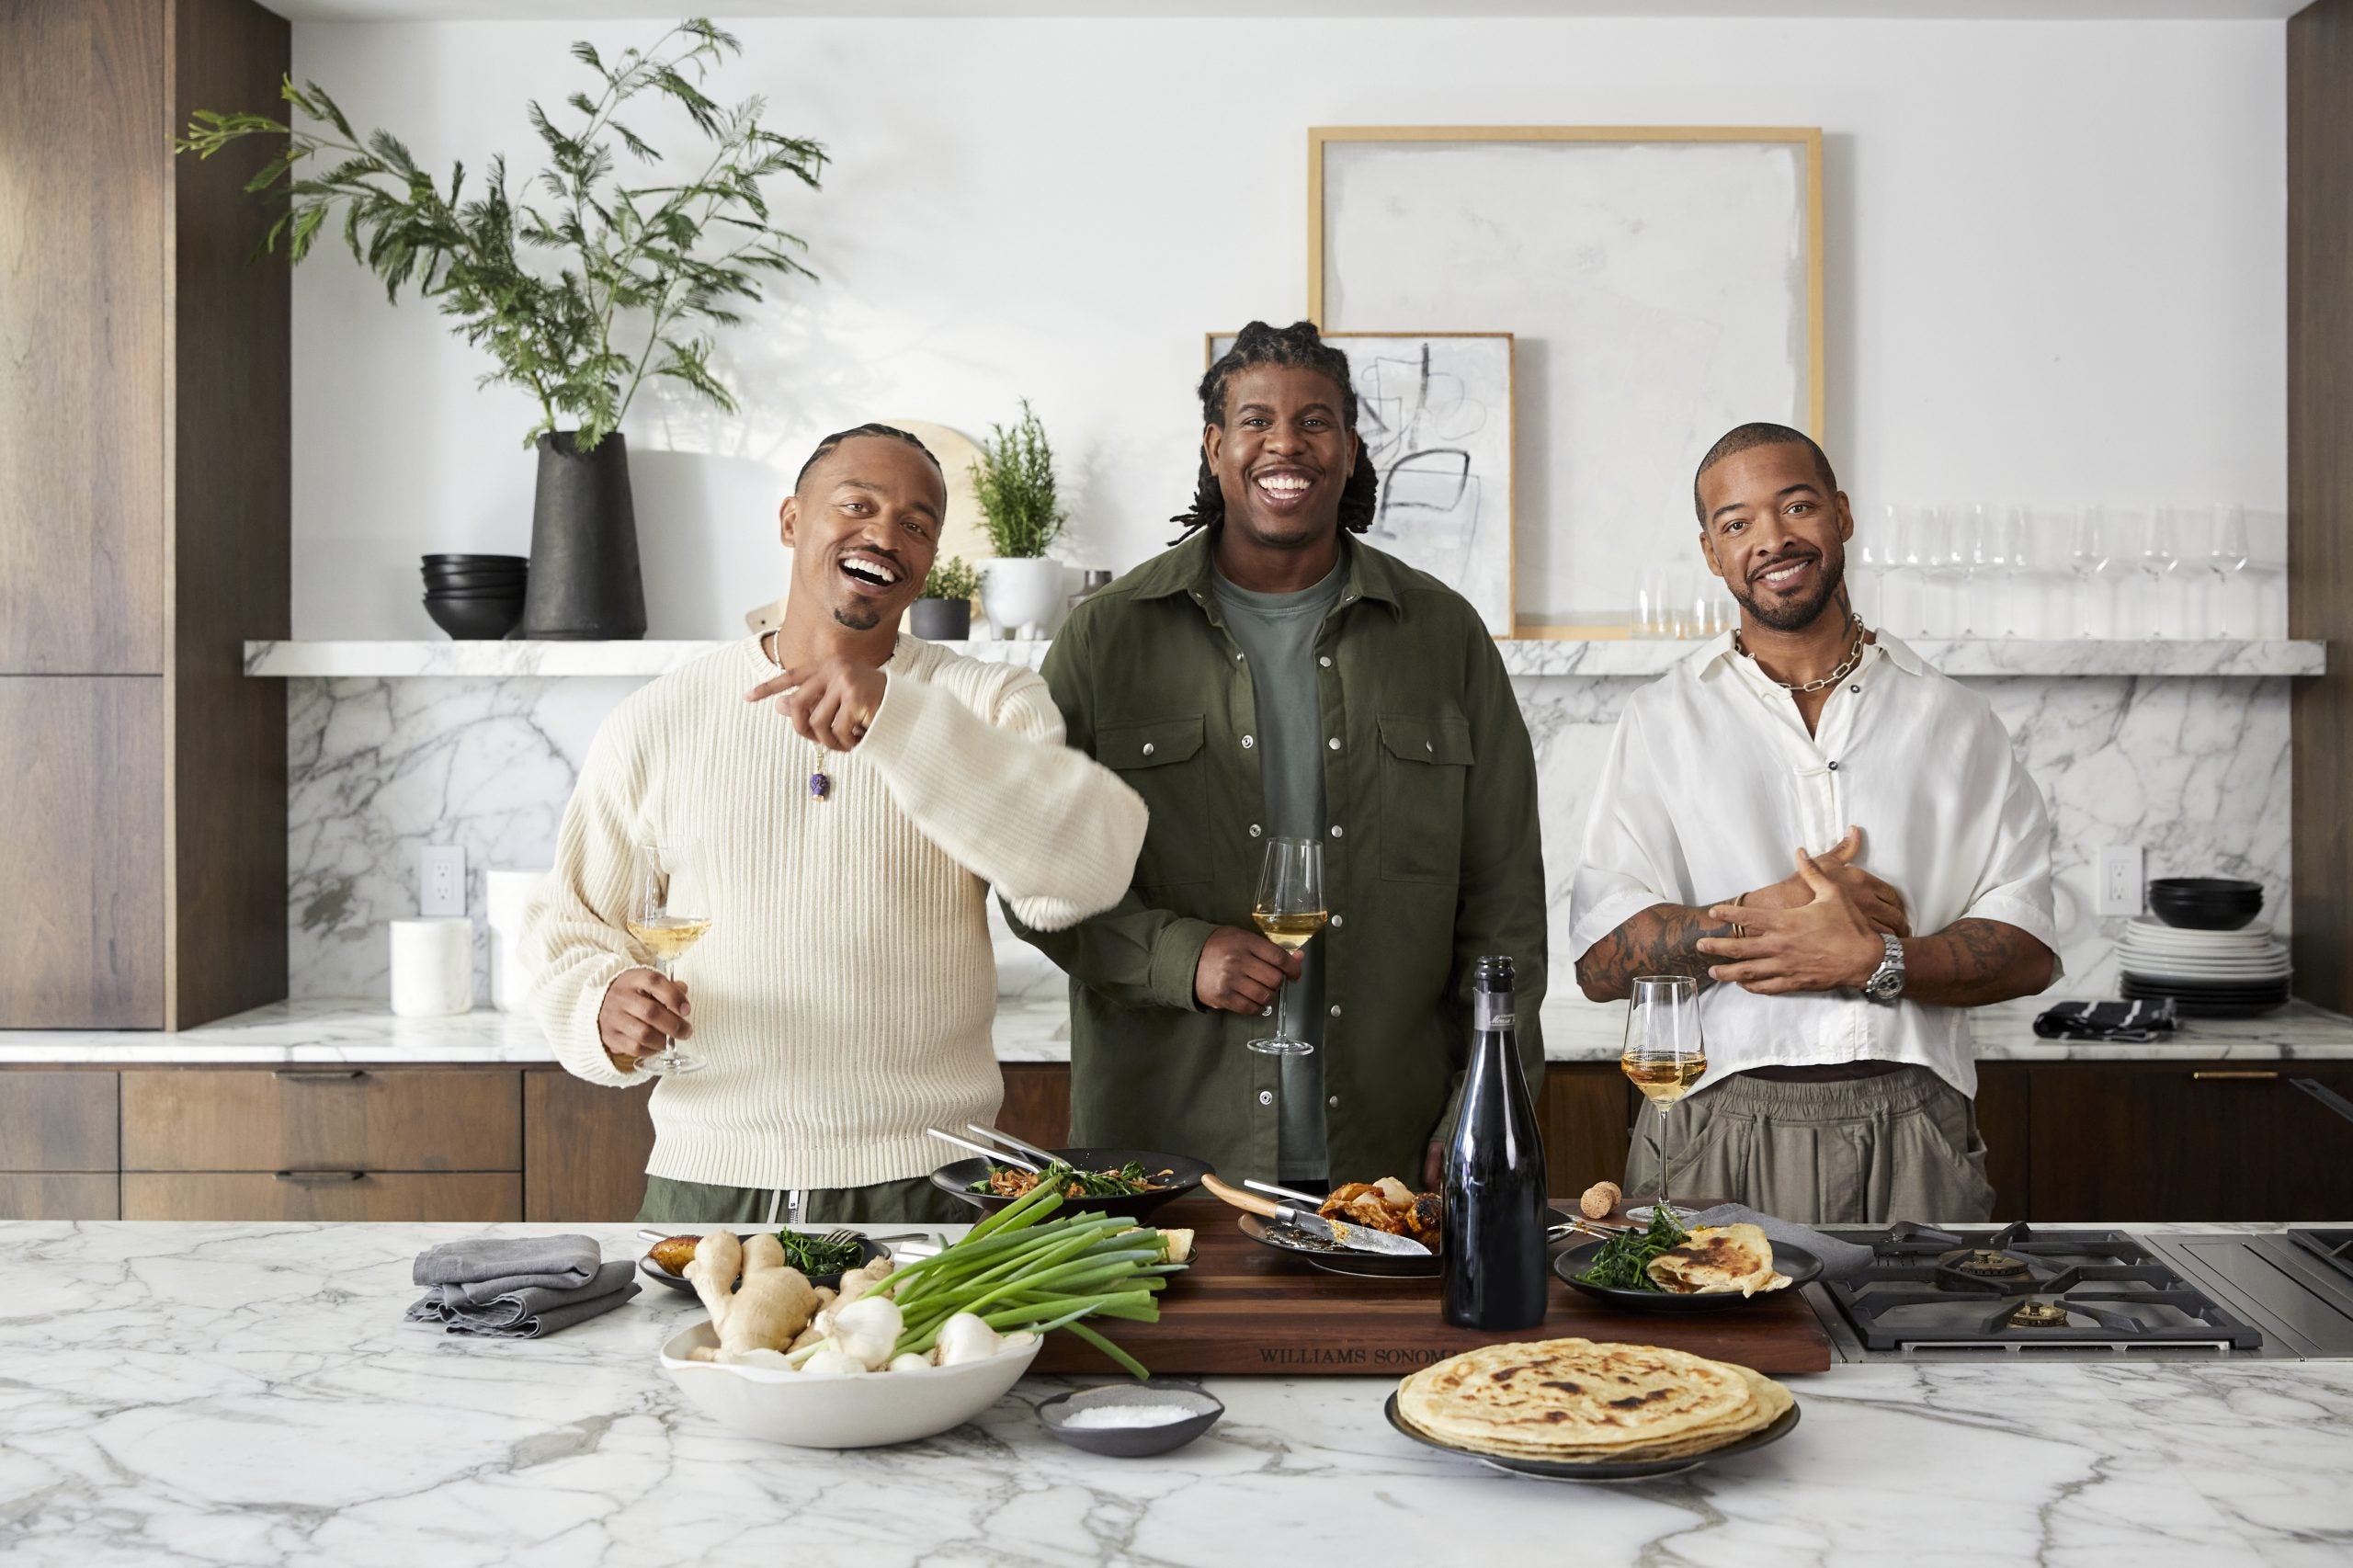 Ghetto Gastro And Williams Sonoma Collaborate On Sleek New Cookware Line